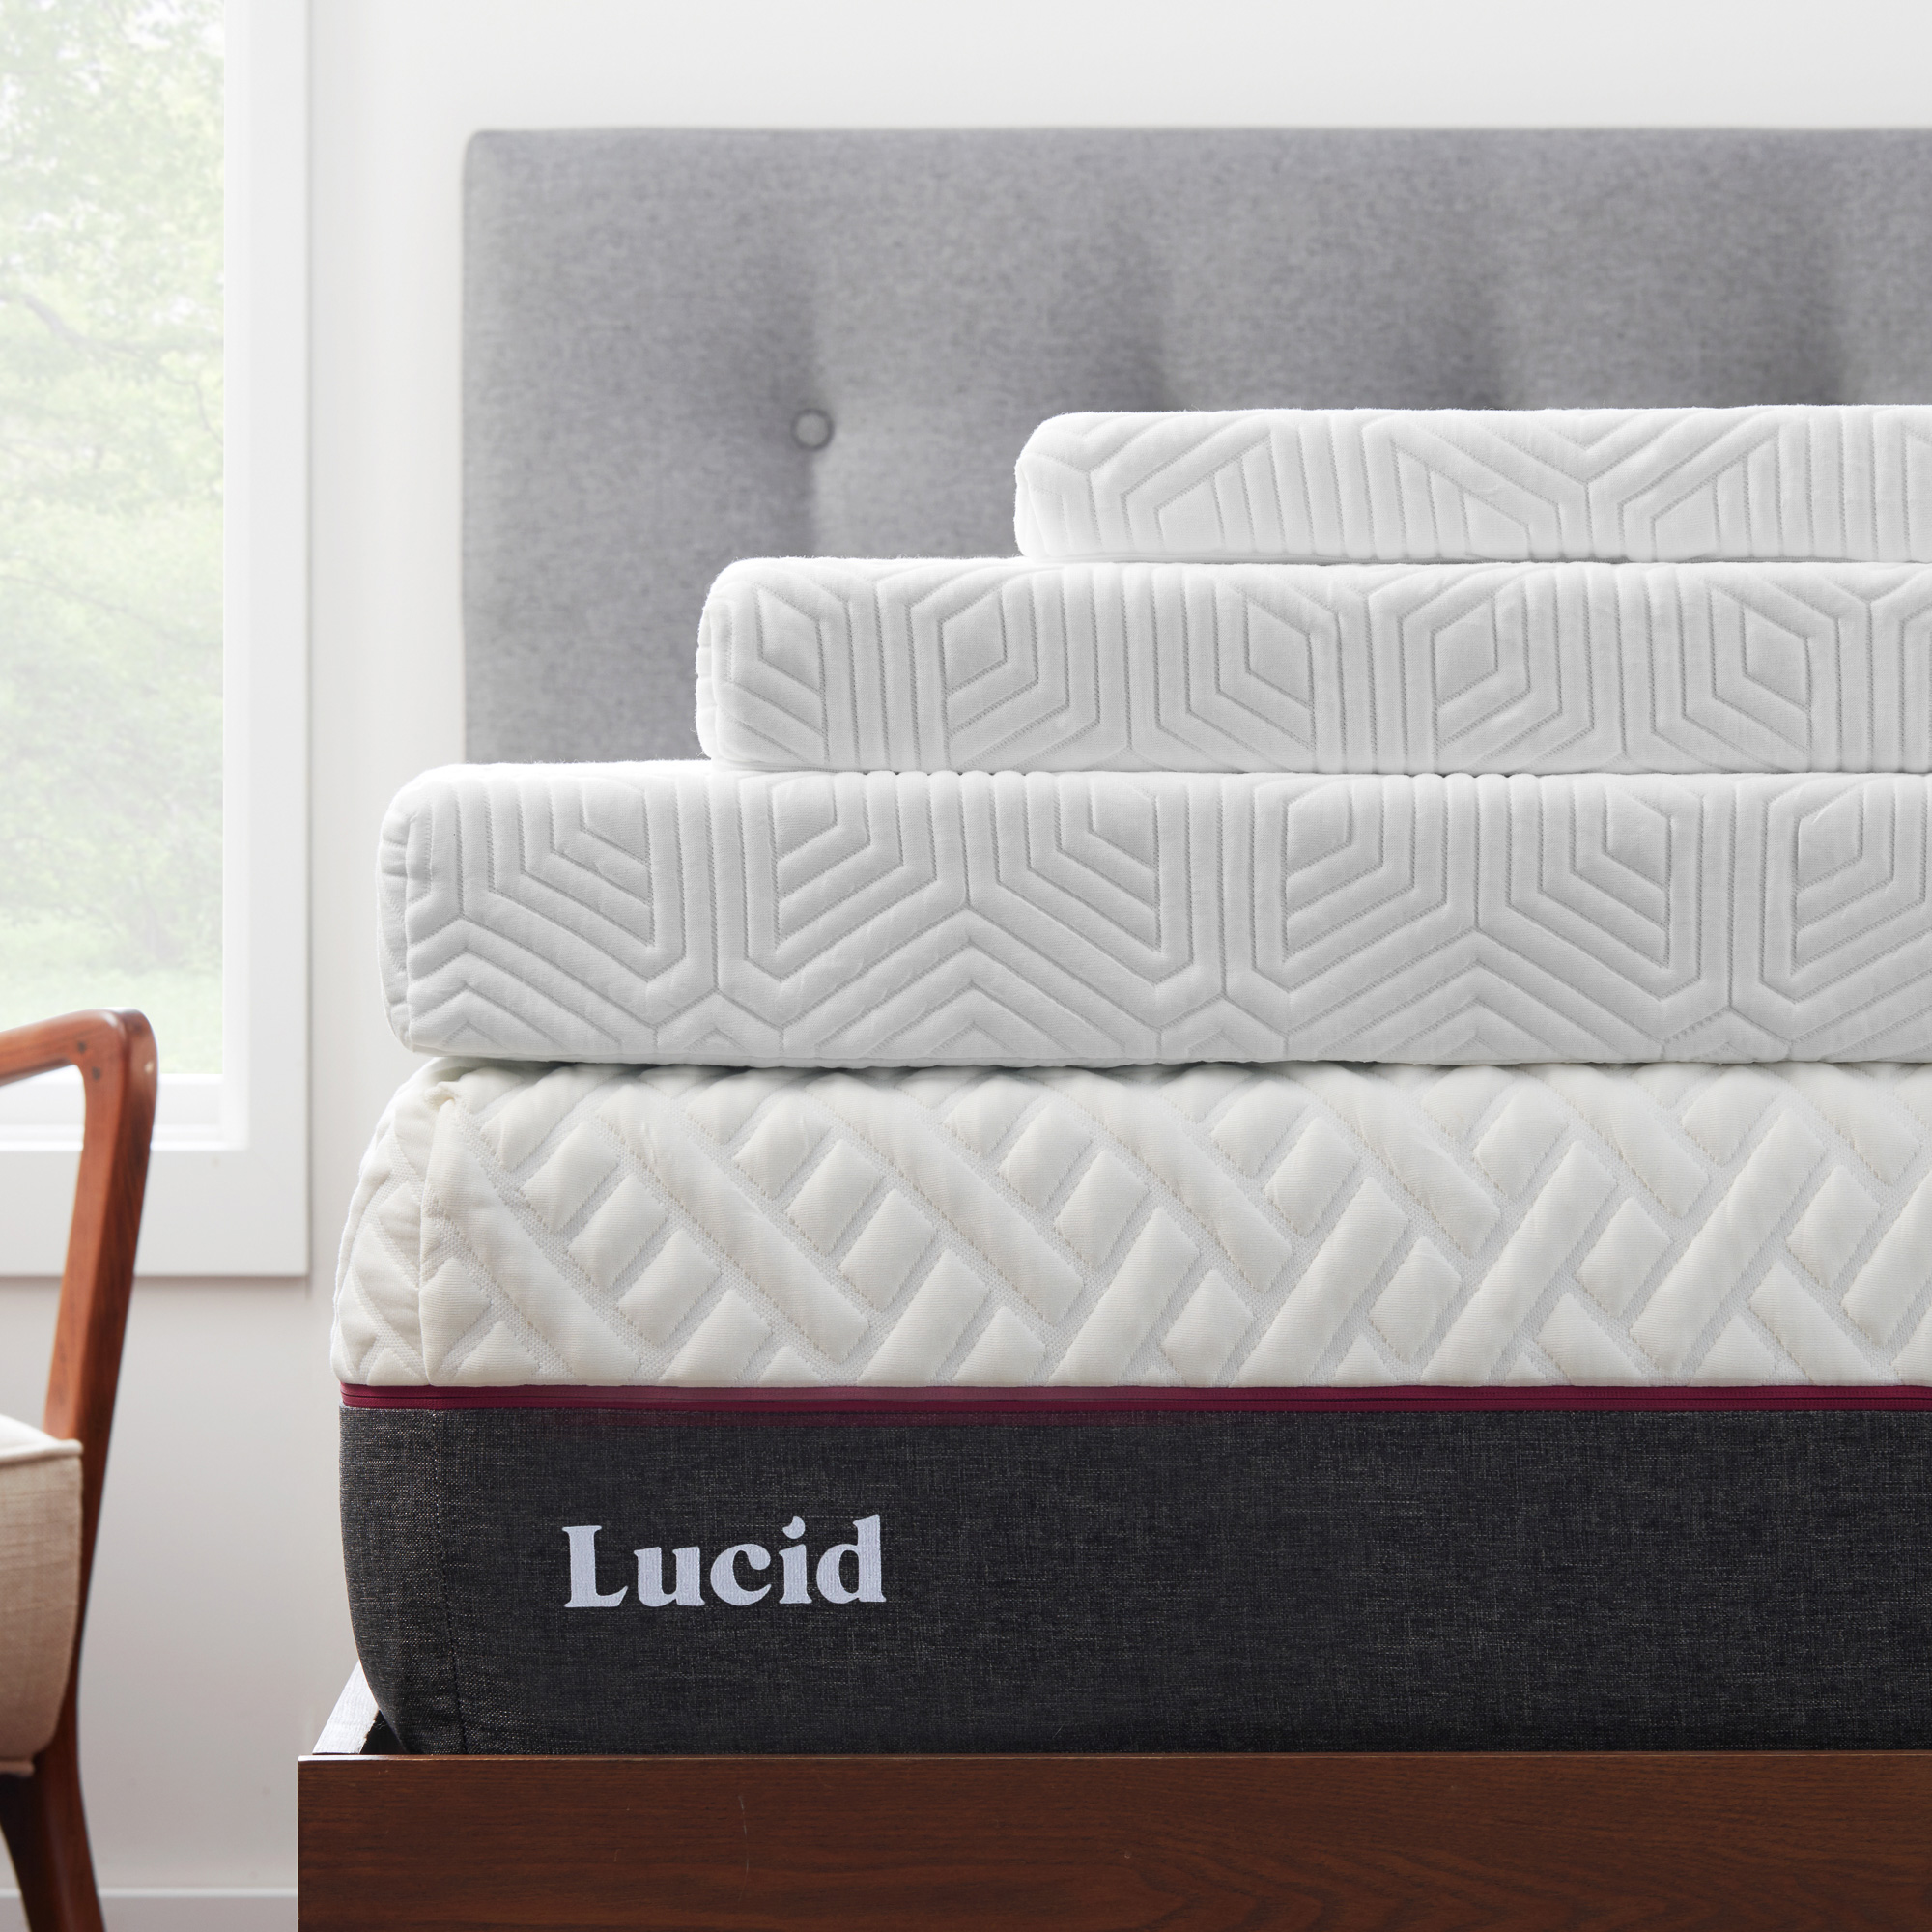 Lucid 4" Cooling Gel Plush Memory Foam Mattress Topper with Cover, Full - image 1 of 13